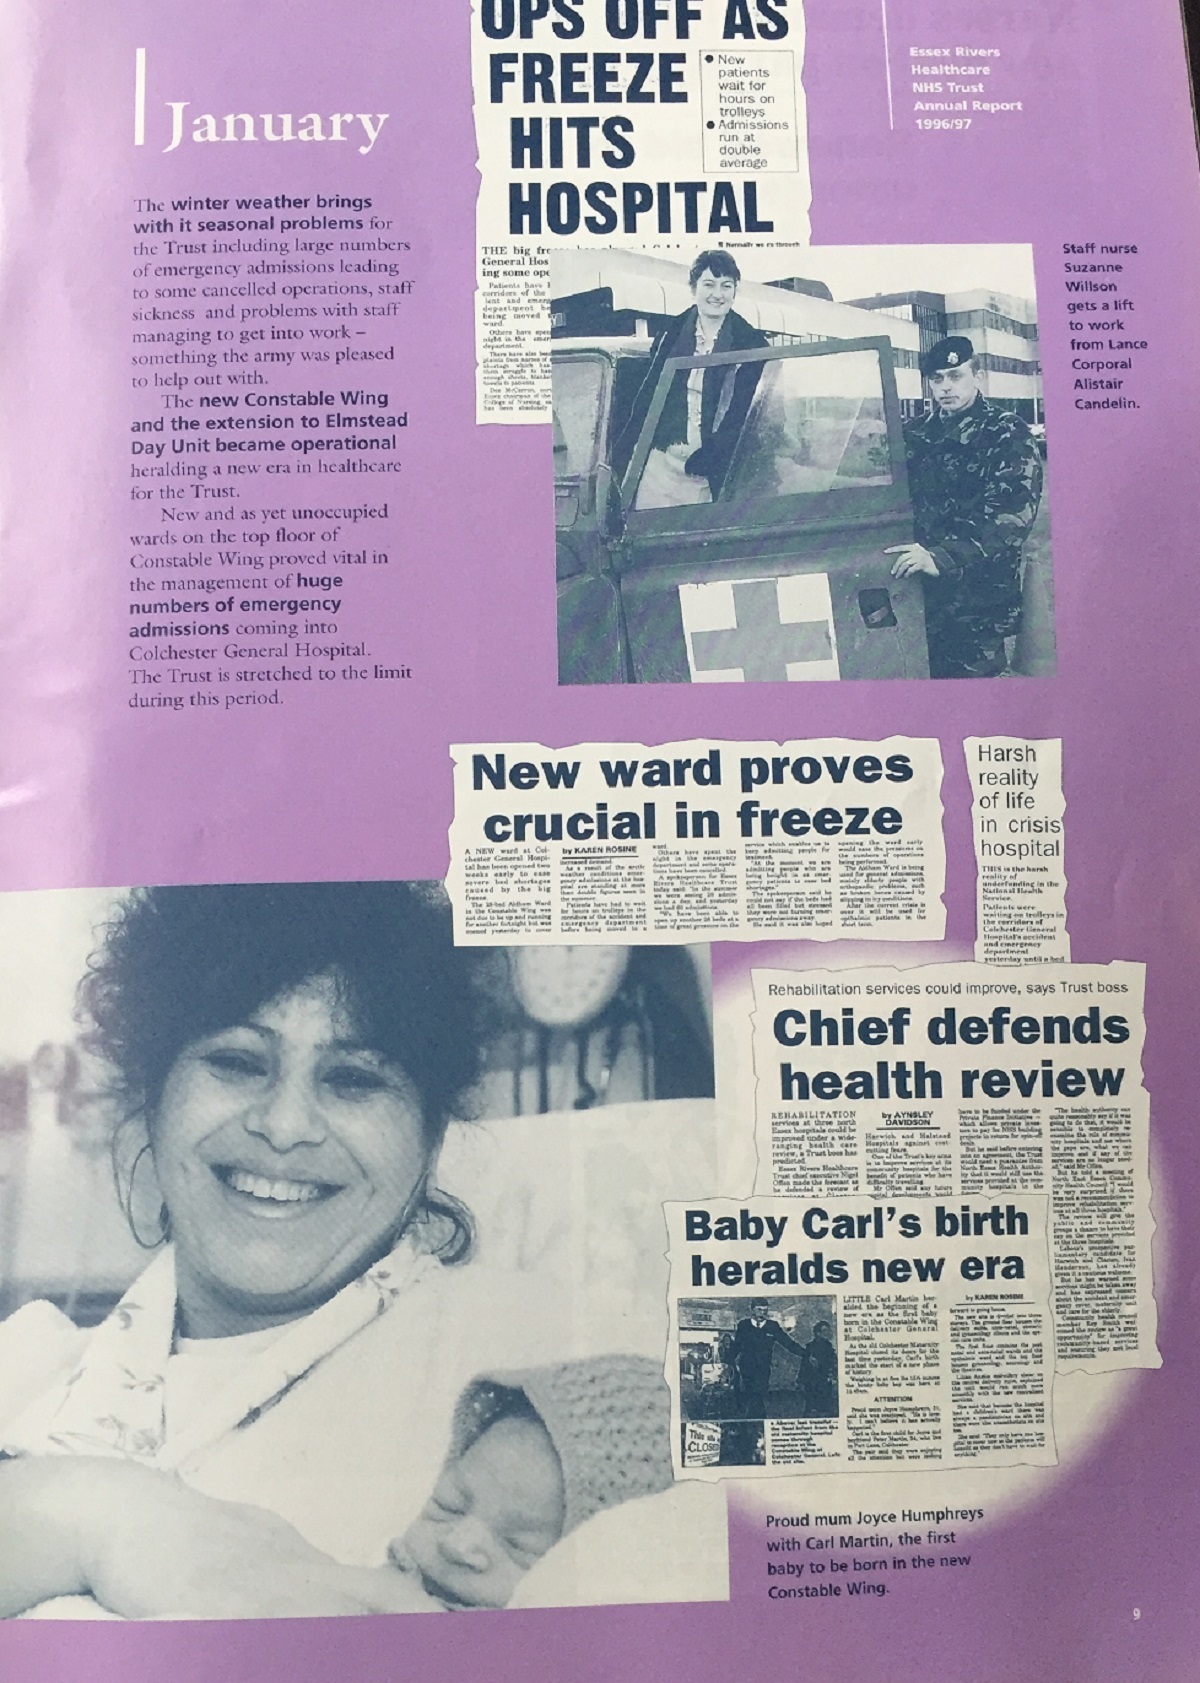 Read all about it - Joyces story featured in Essex Rivers Healthcares annual report for 1996/97